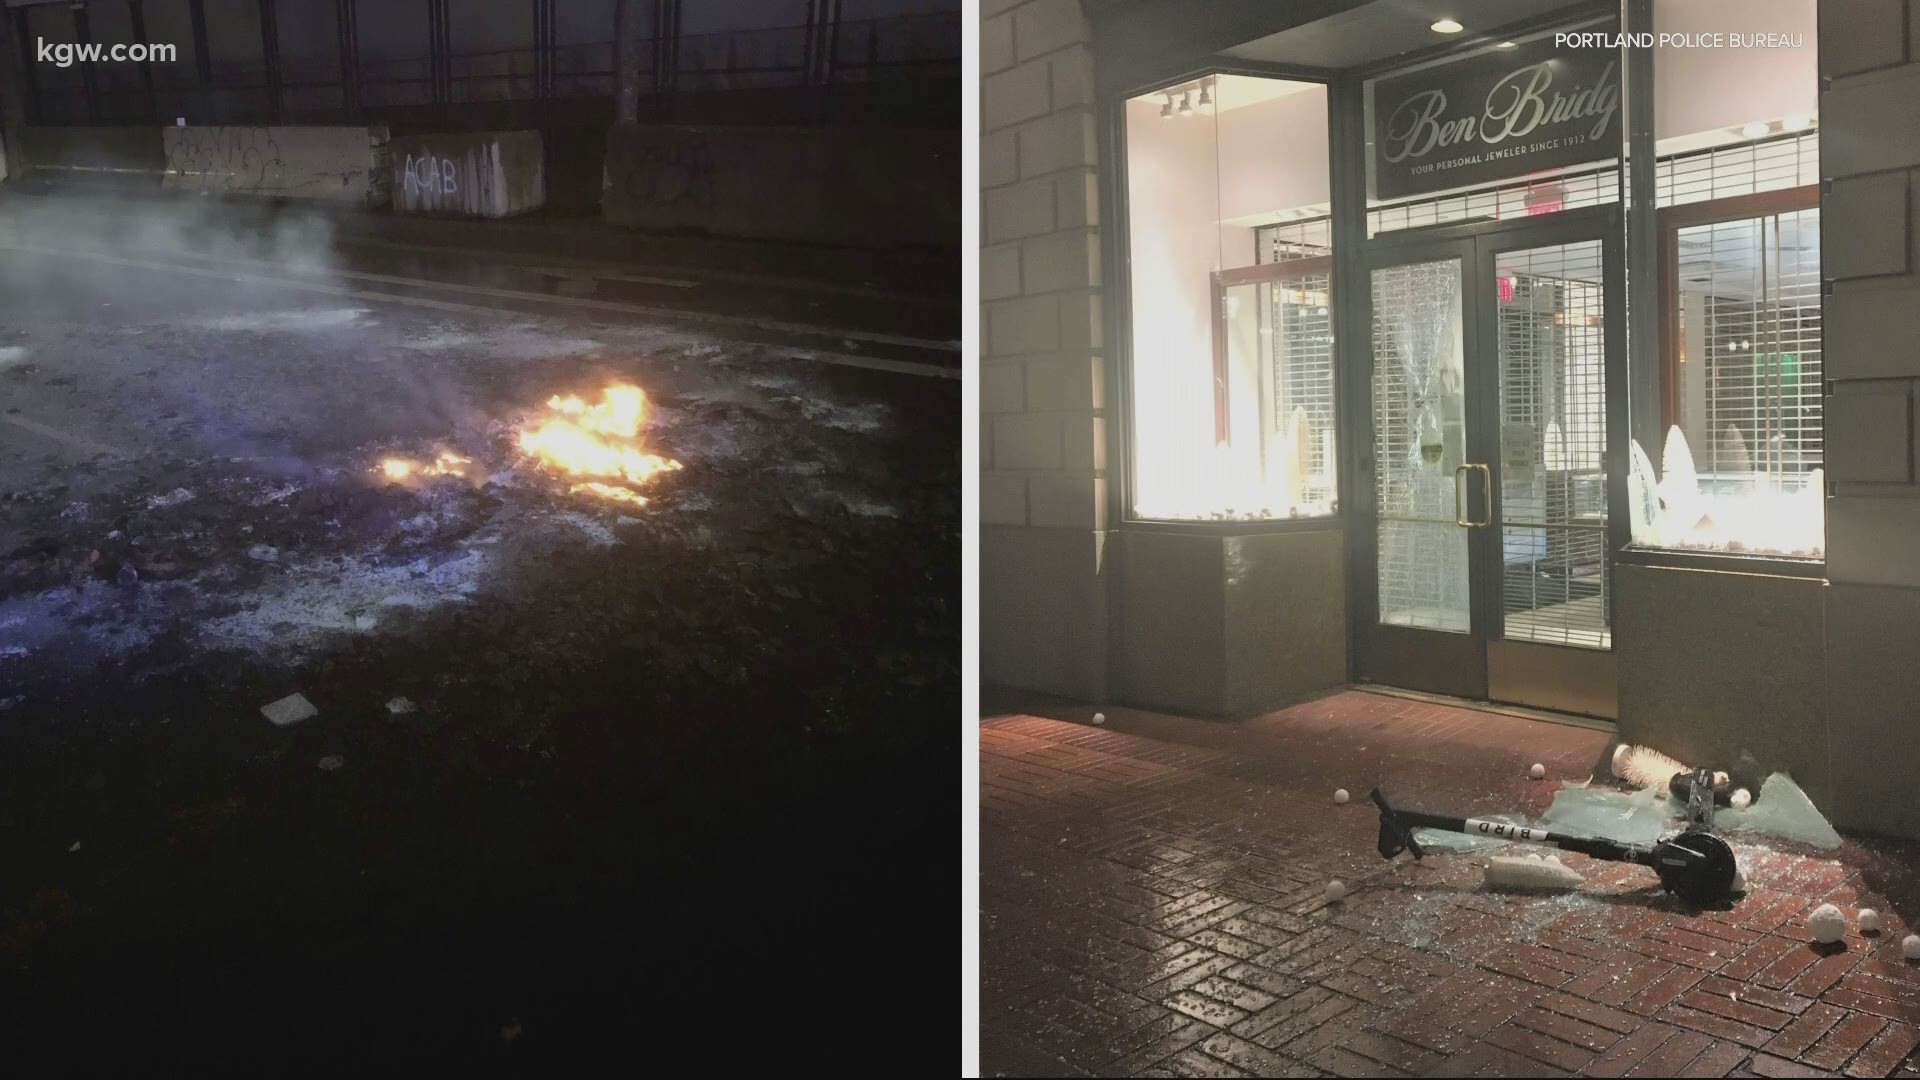 City officials react to the riots that rang in the new year in Portland.